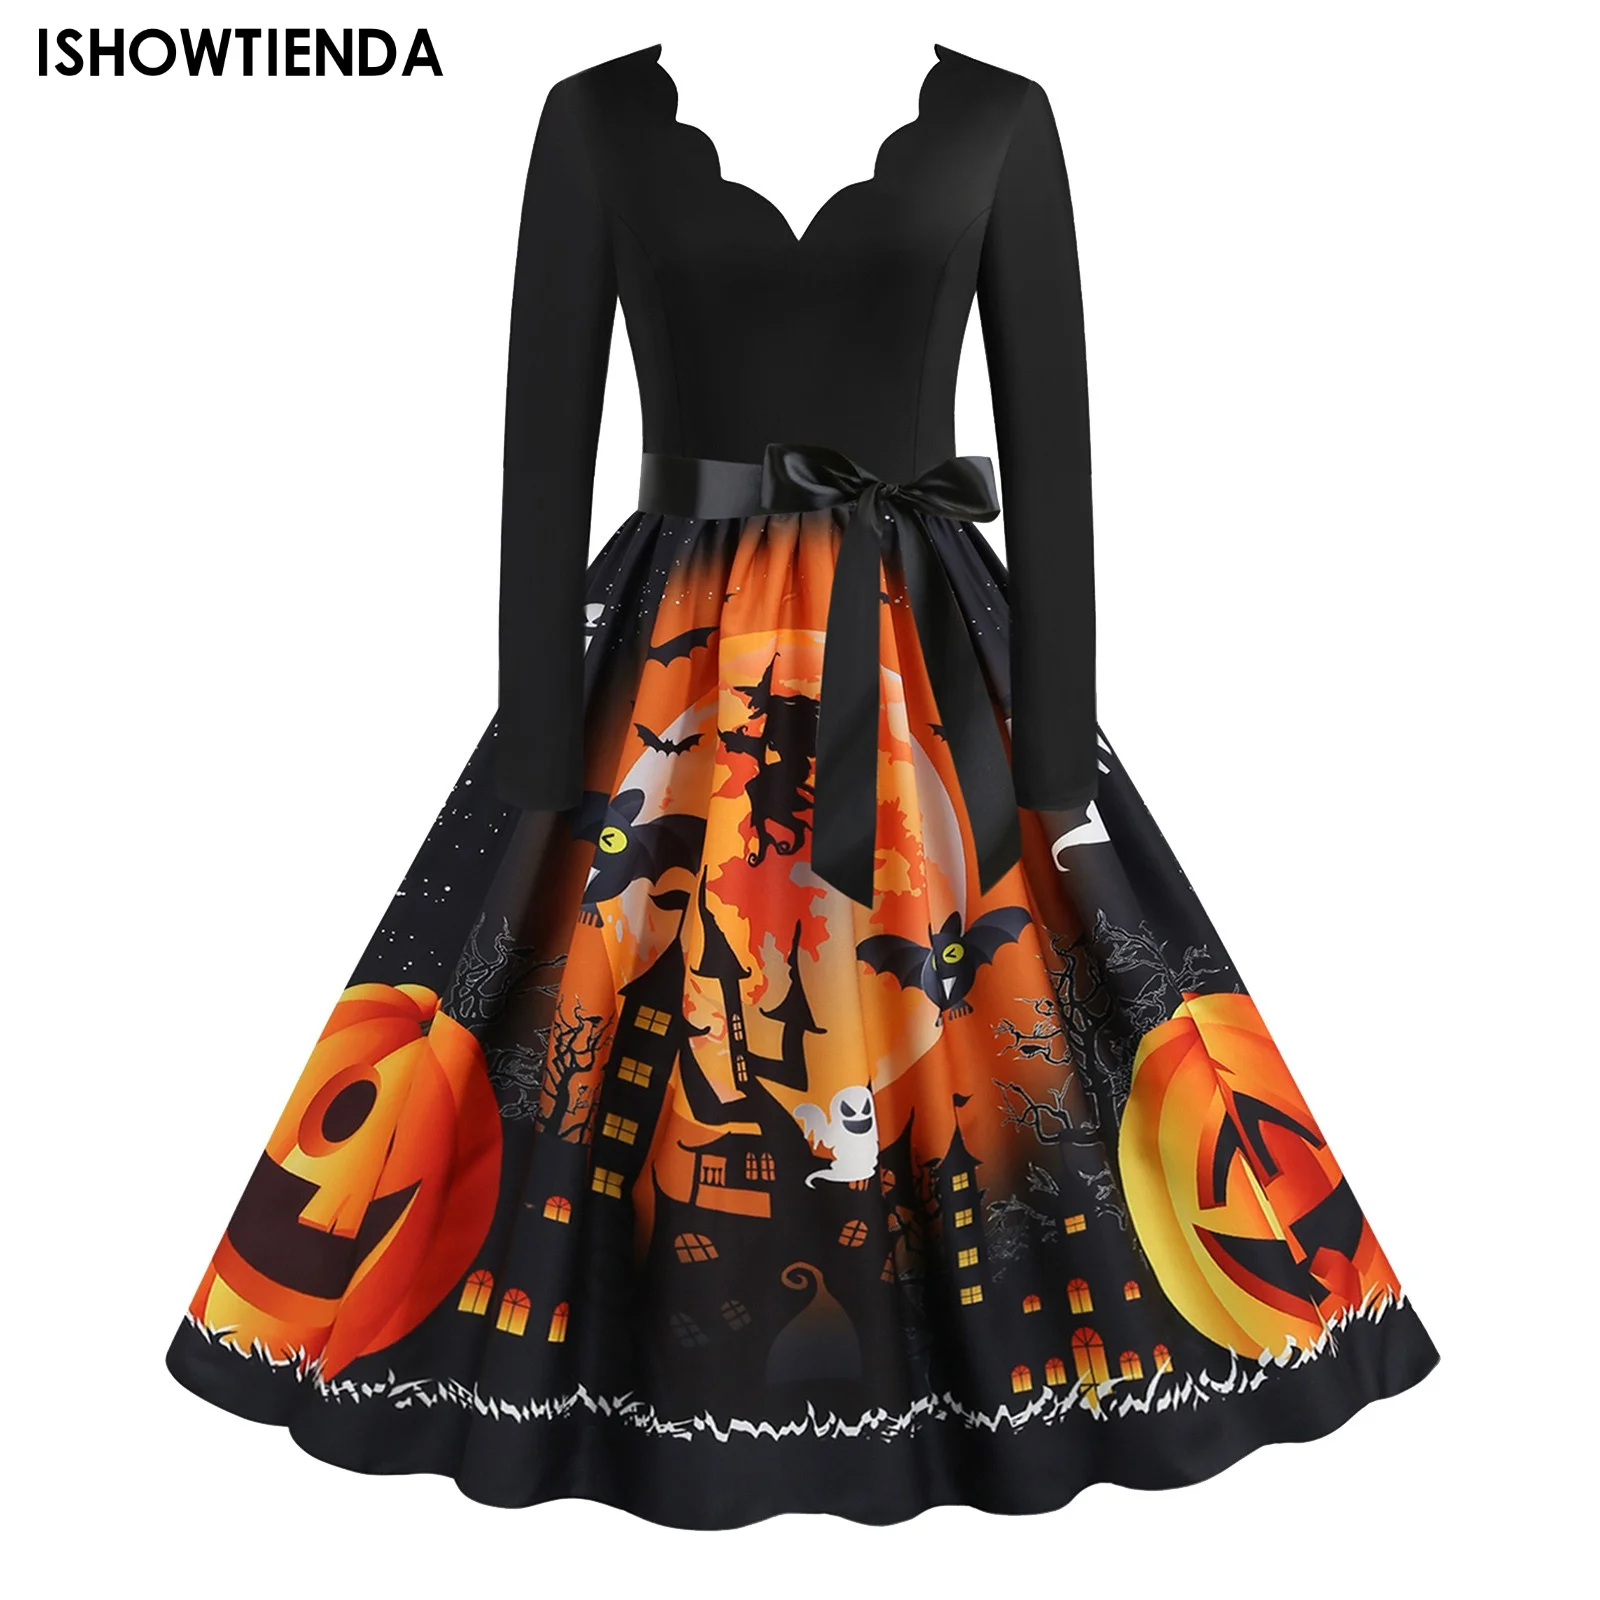 

2023 Scary Costumes Women Halloween Party Dress Long Sleeve V Neck Skull Print Black Gothic Pinup Vintage Dresses Nightmare